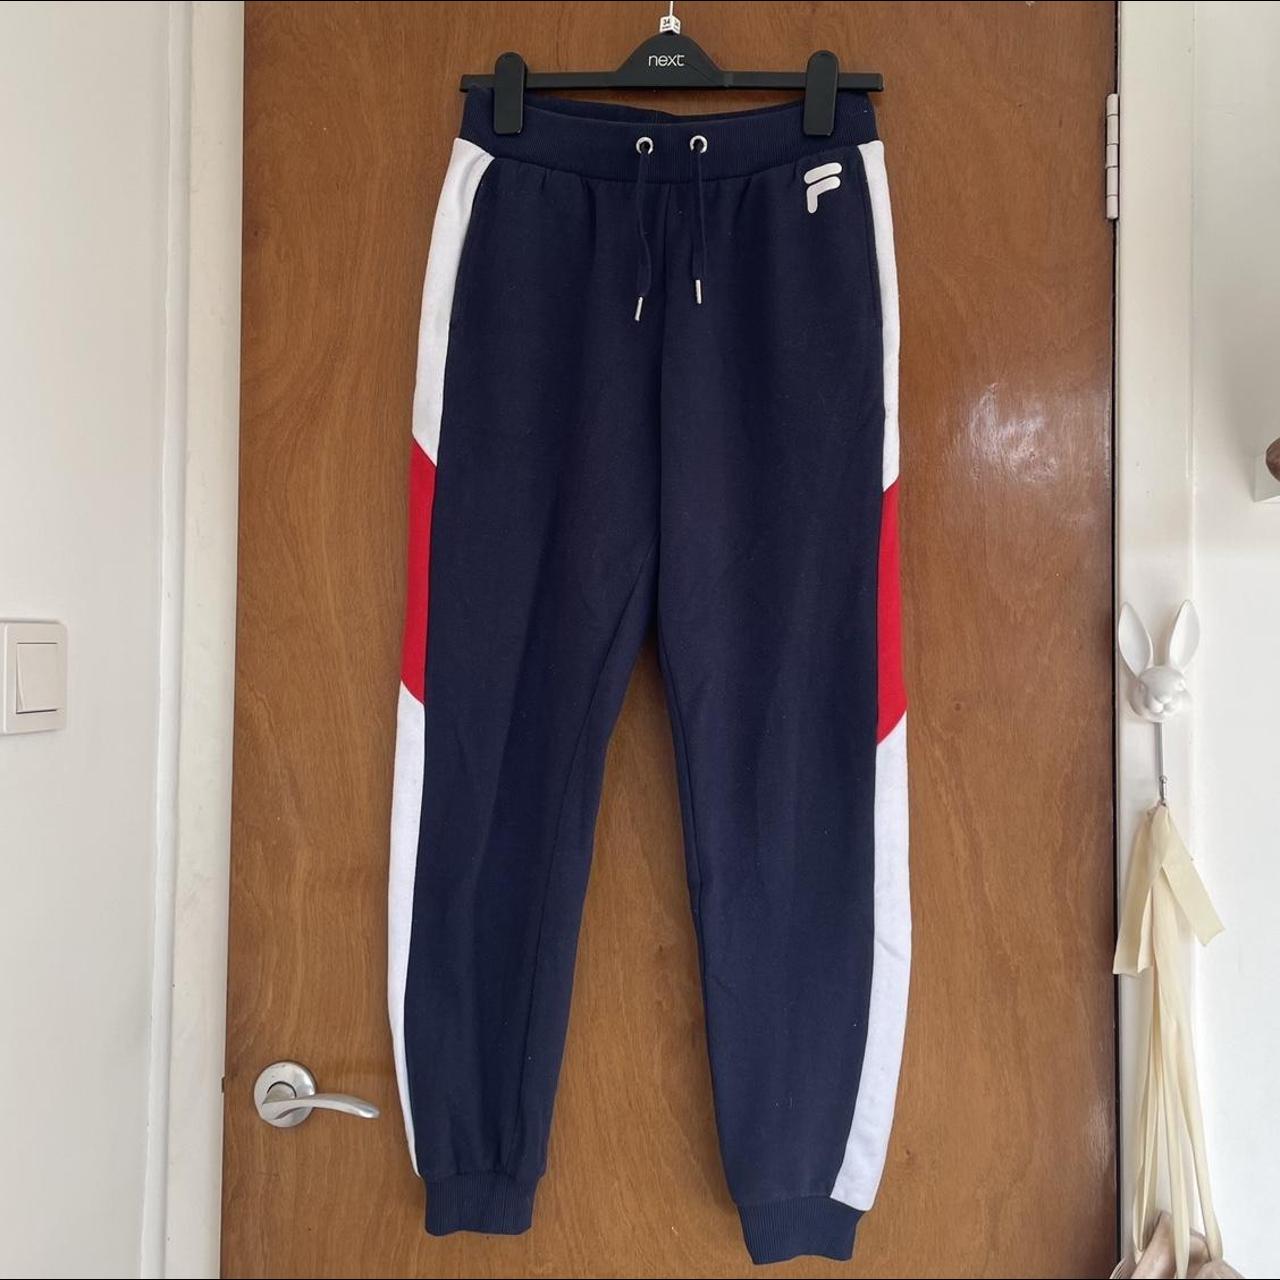 Fila Women's Navy and White Joggers-tracksuits | Depop